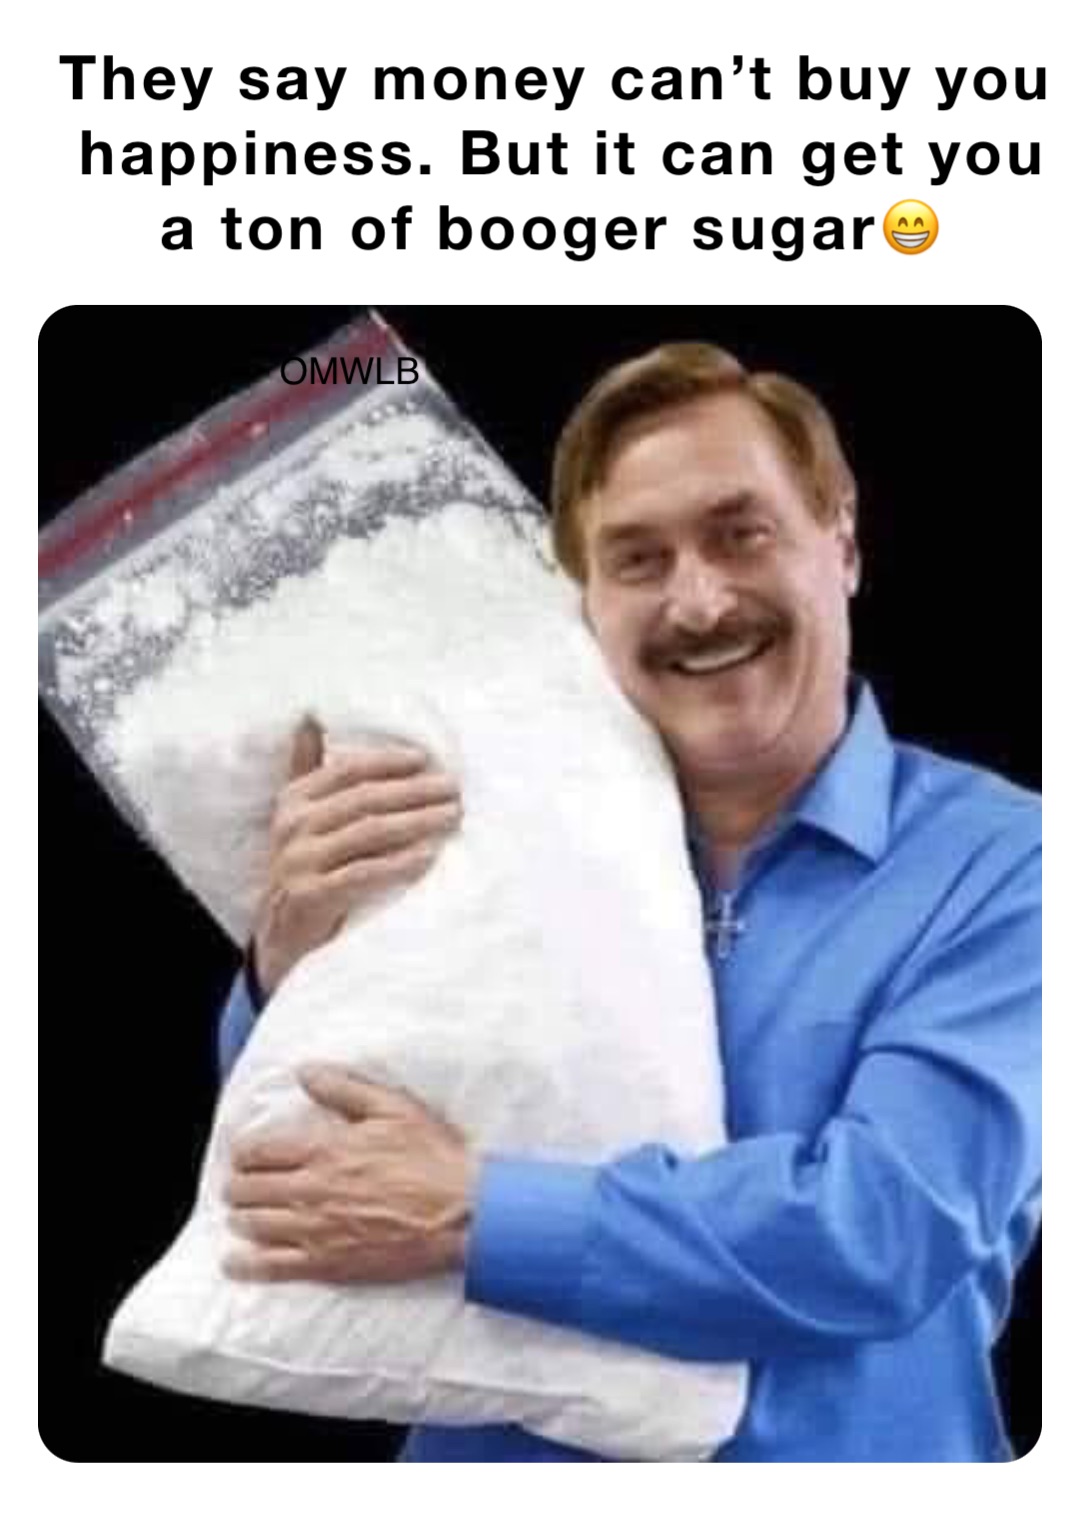 They say money can’t buy you happiness. But it can get you a ton of booger sugar😁